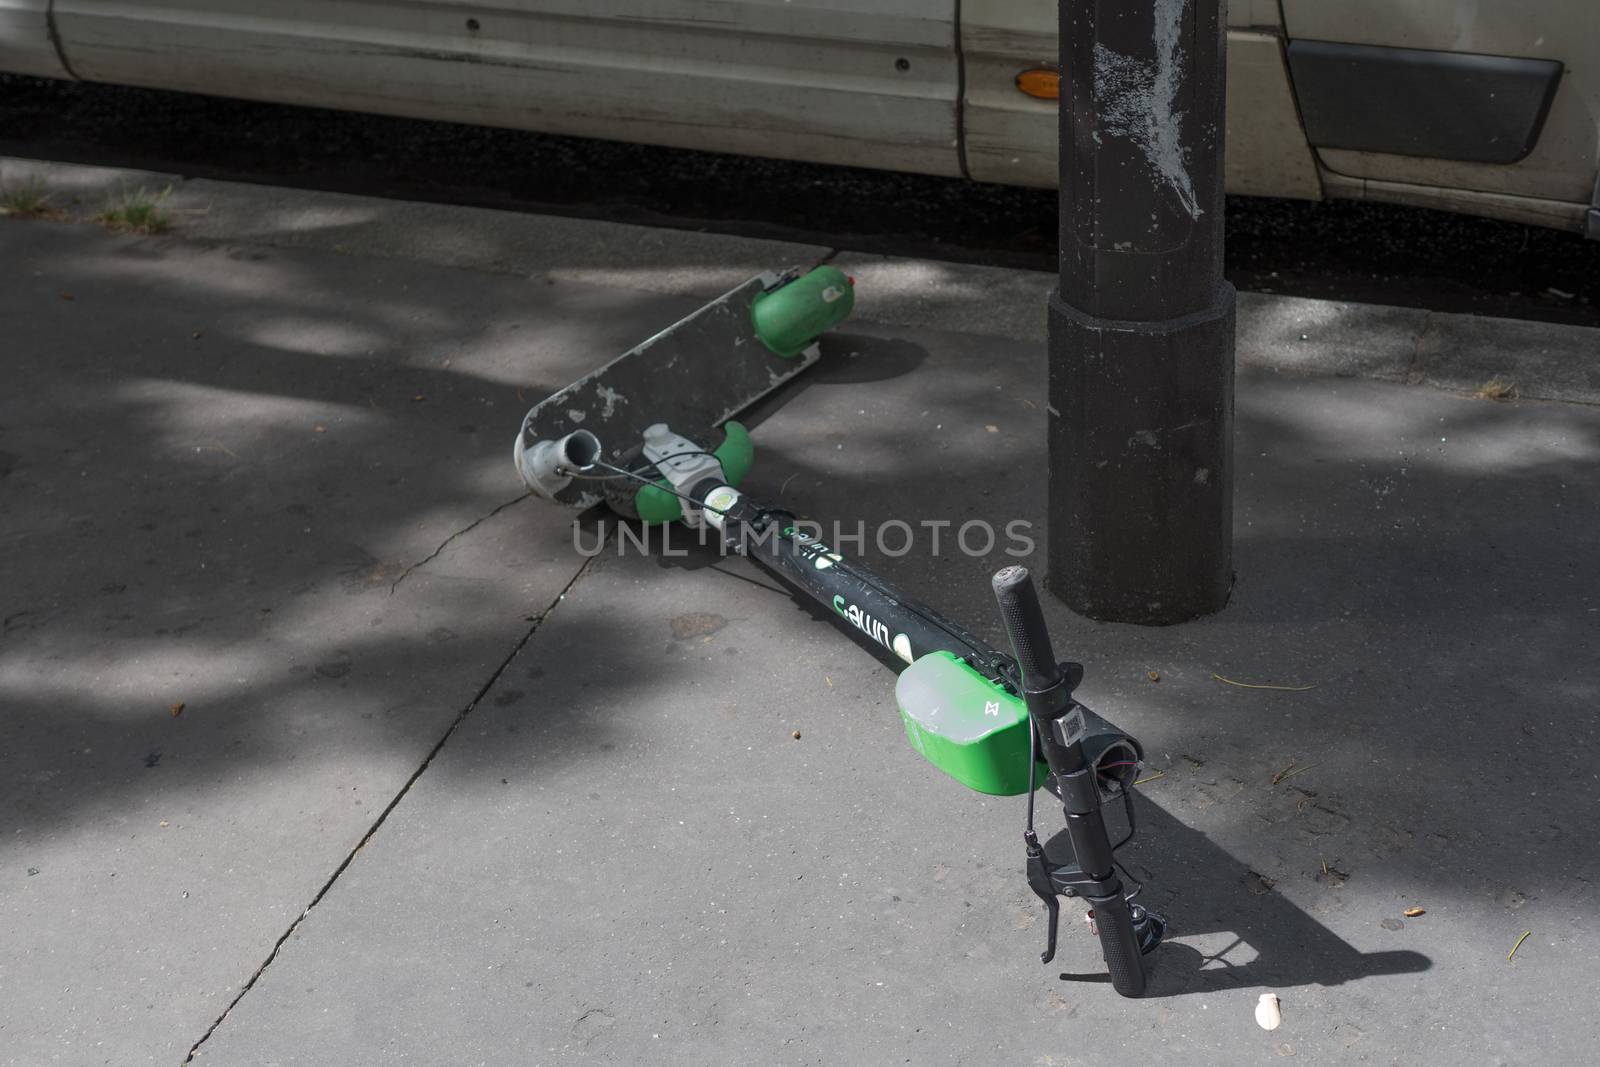 French parisian non ecological lifestyle : short term use objects : Broken electric scooter on the road in Paris, France by ontheroadagain